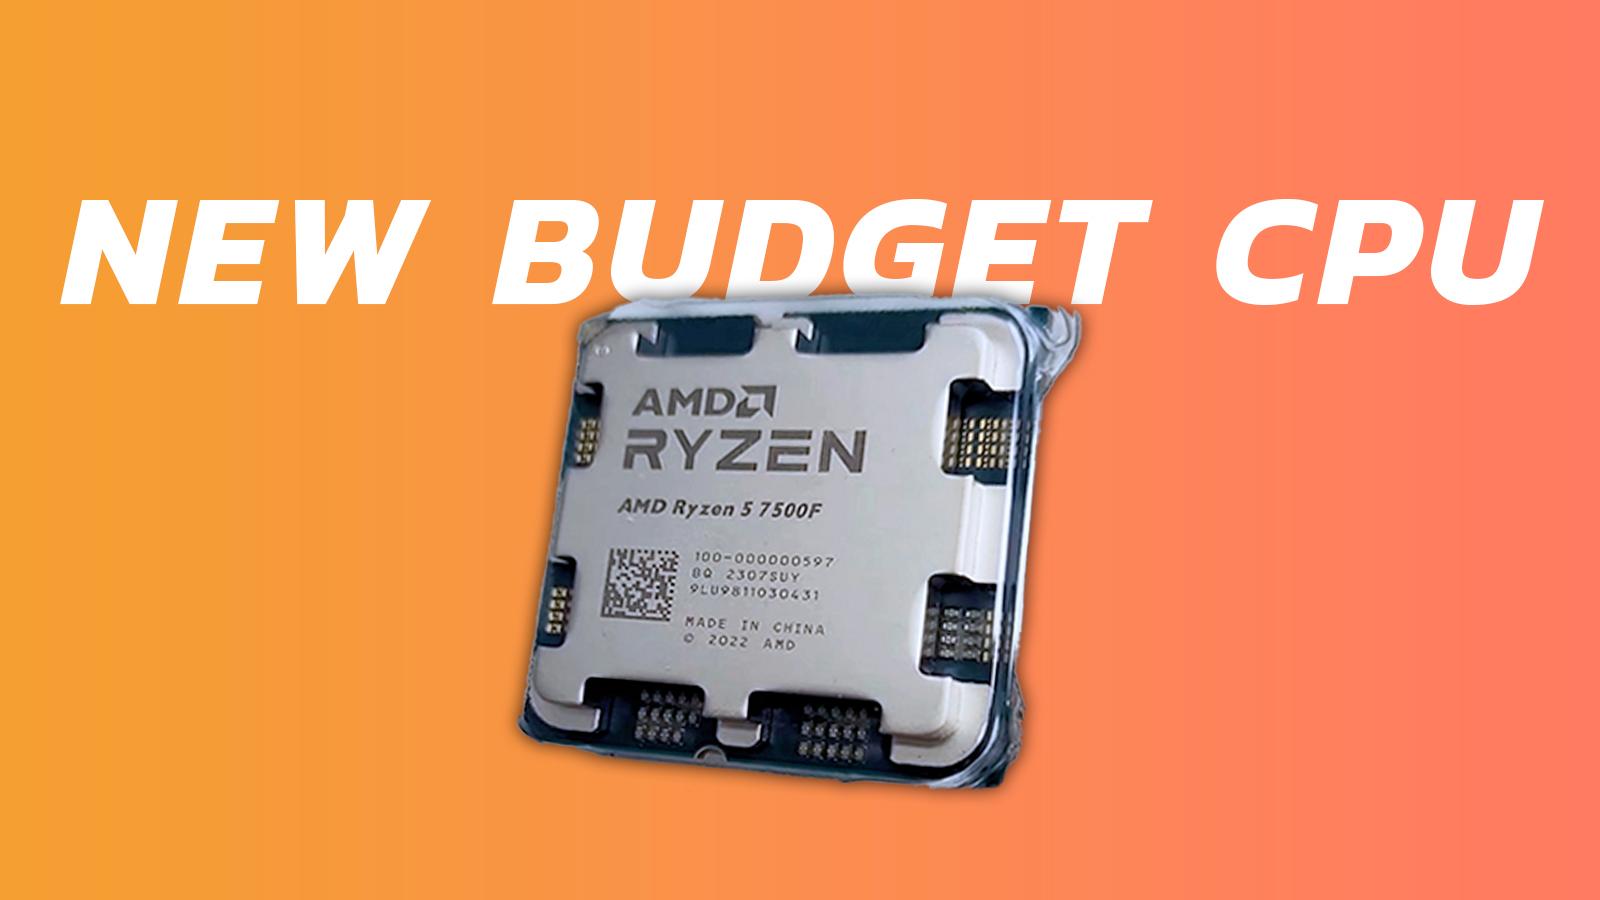 New Budget CPU with 7500F from AMD in front